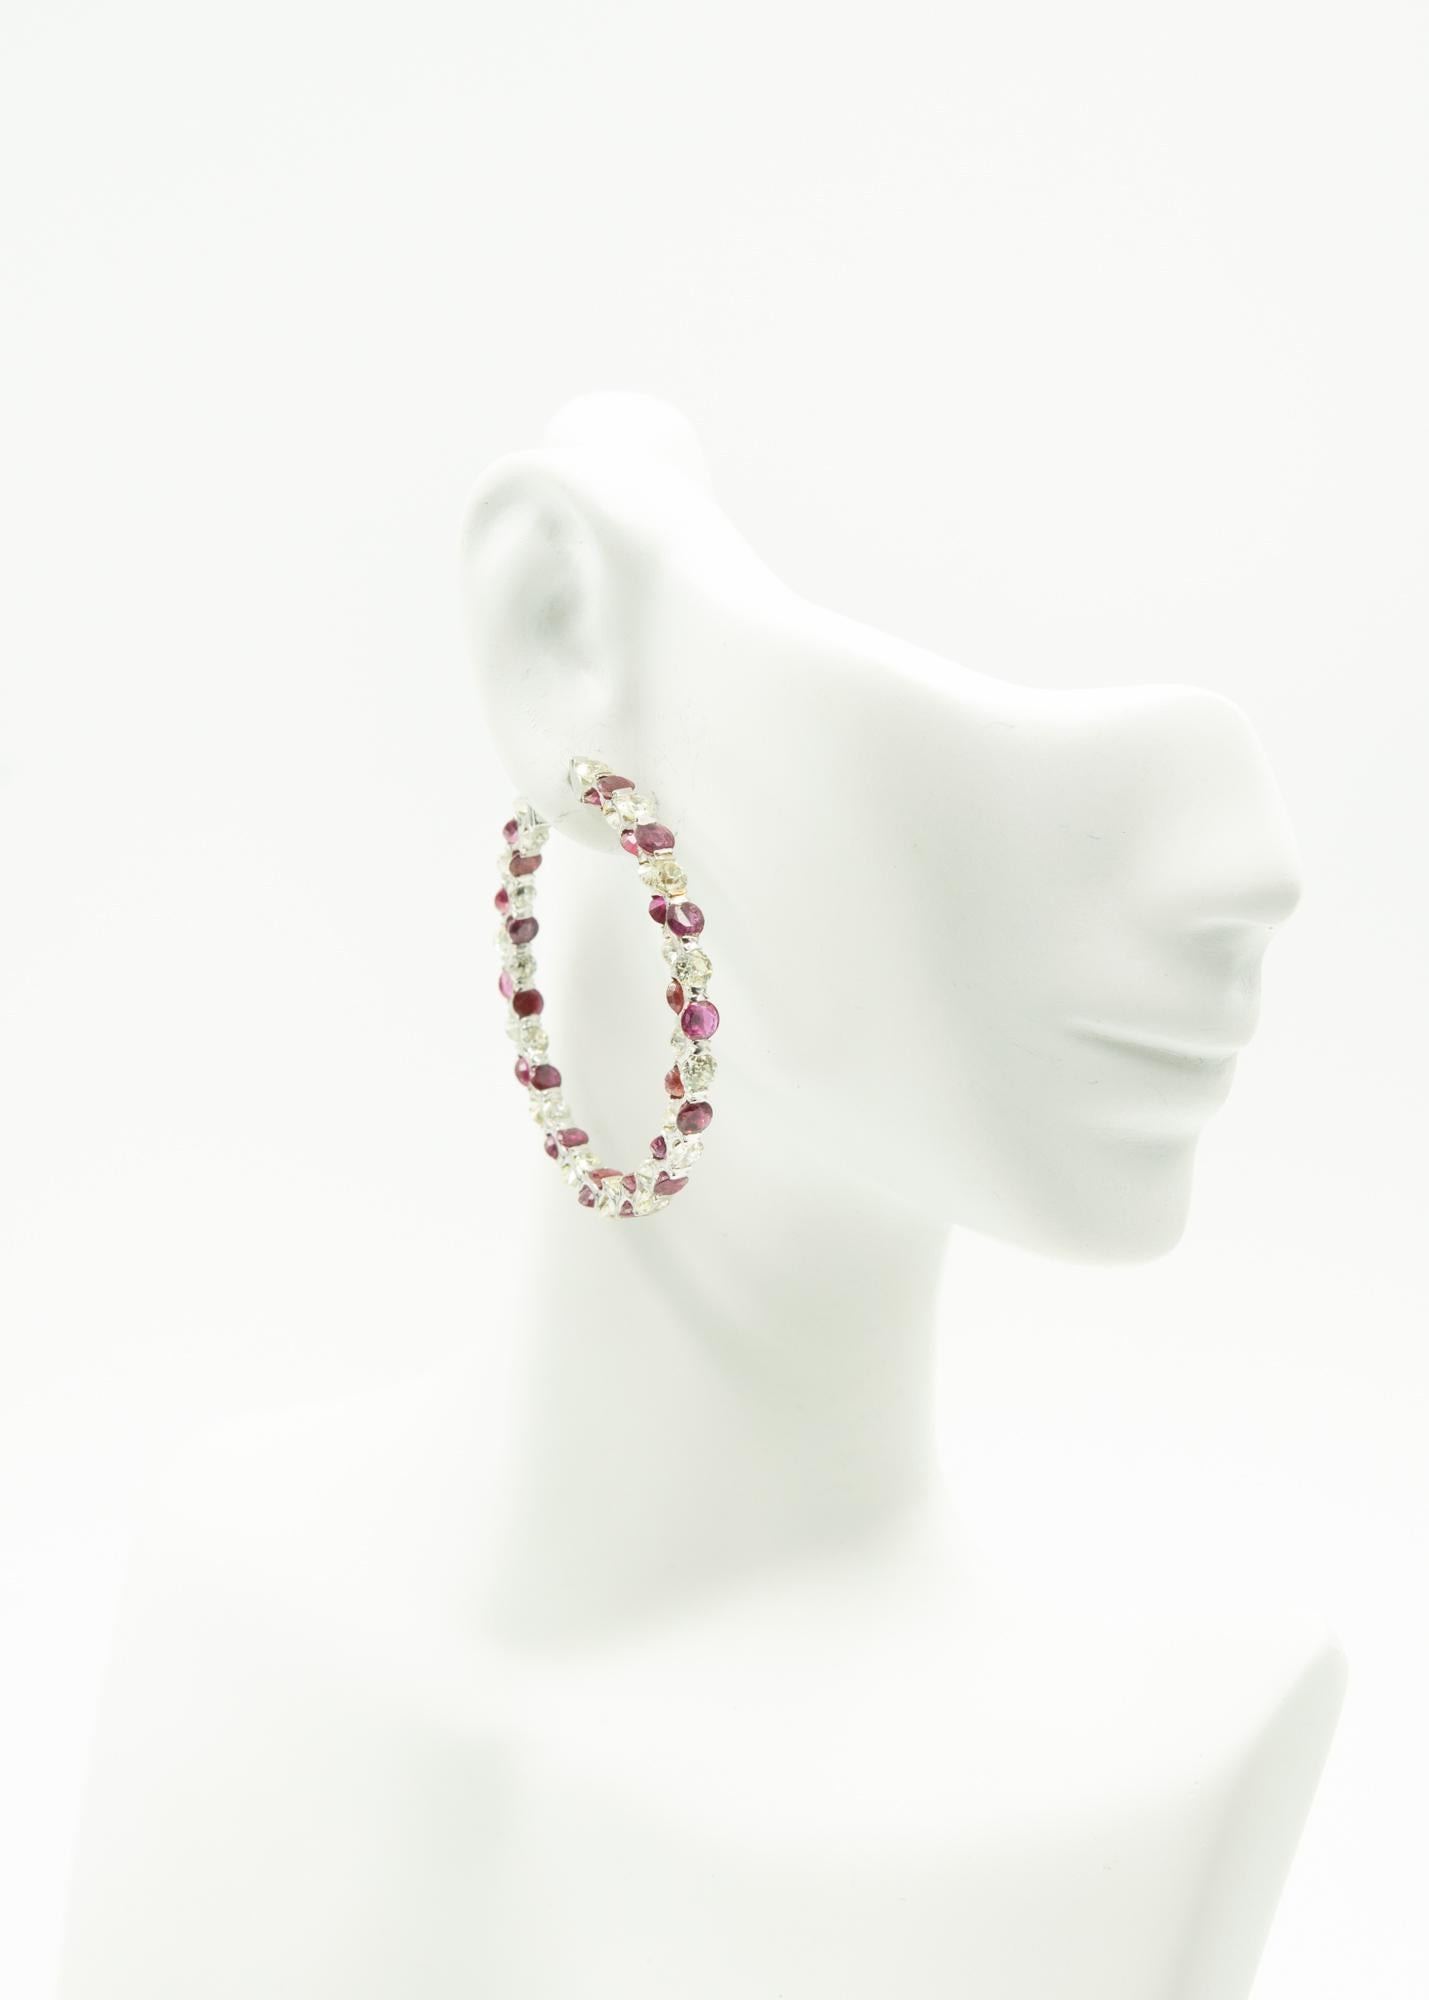 Impressive diamond hoops with 5 carats of rubies and 5 carats in European cut diamonds set in 18k white gold.